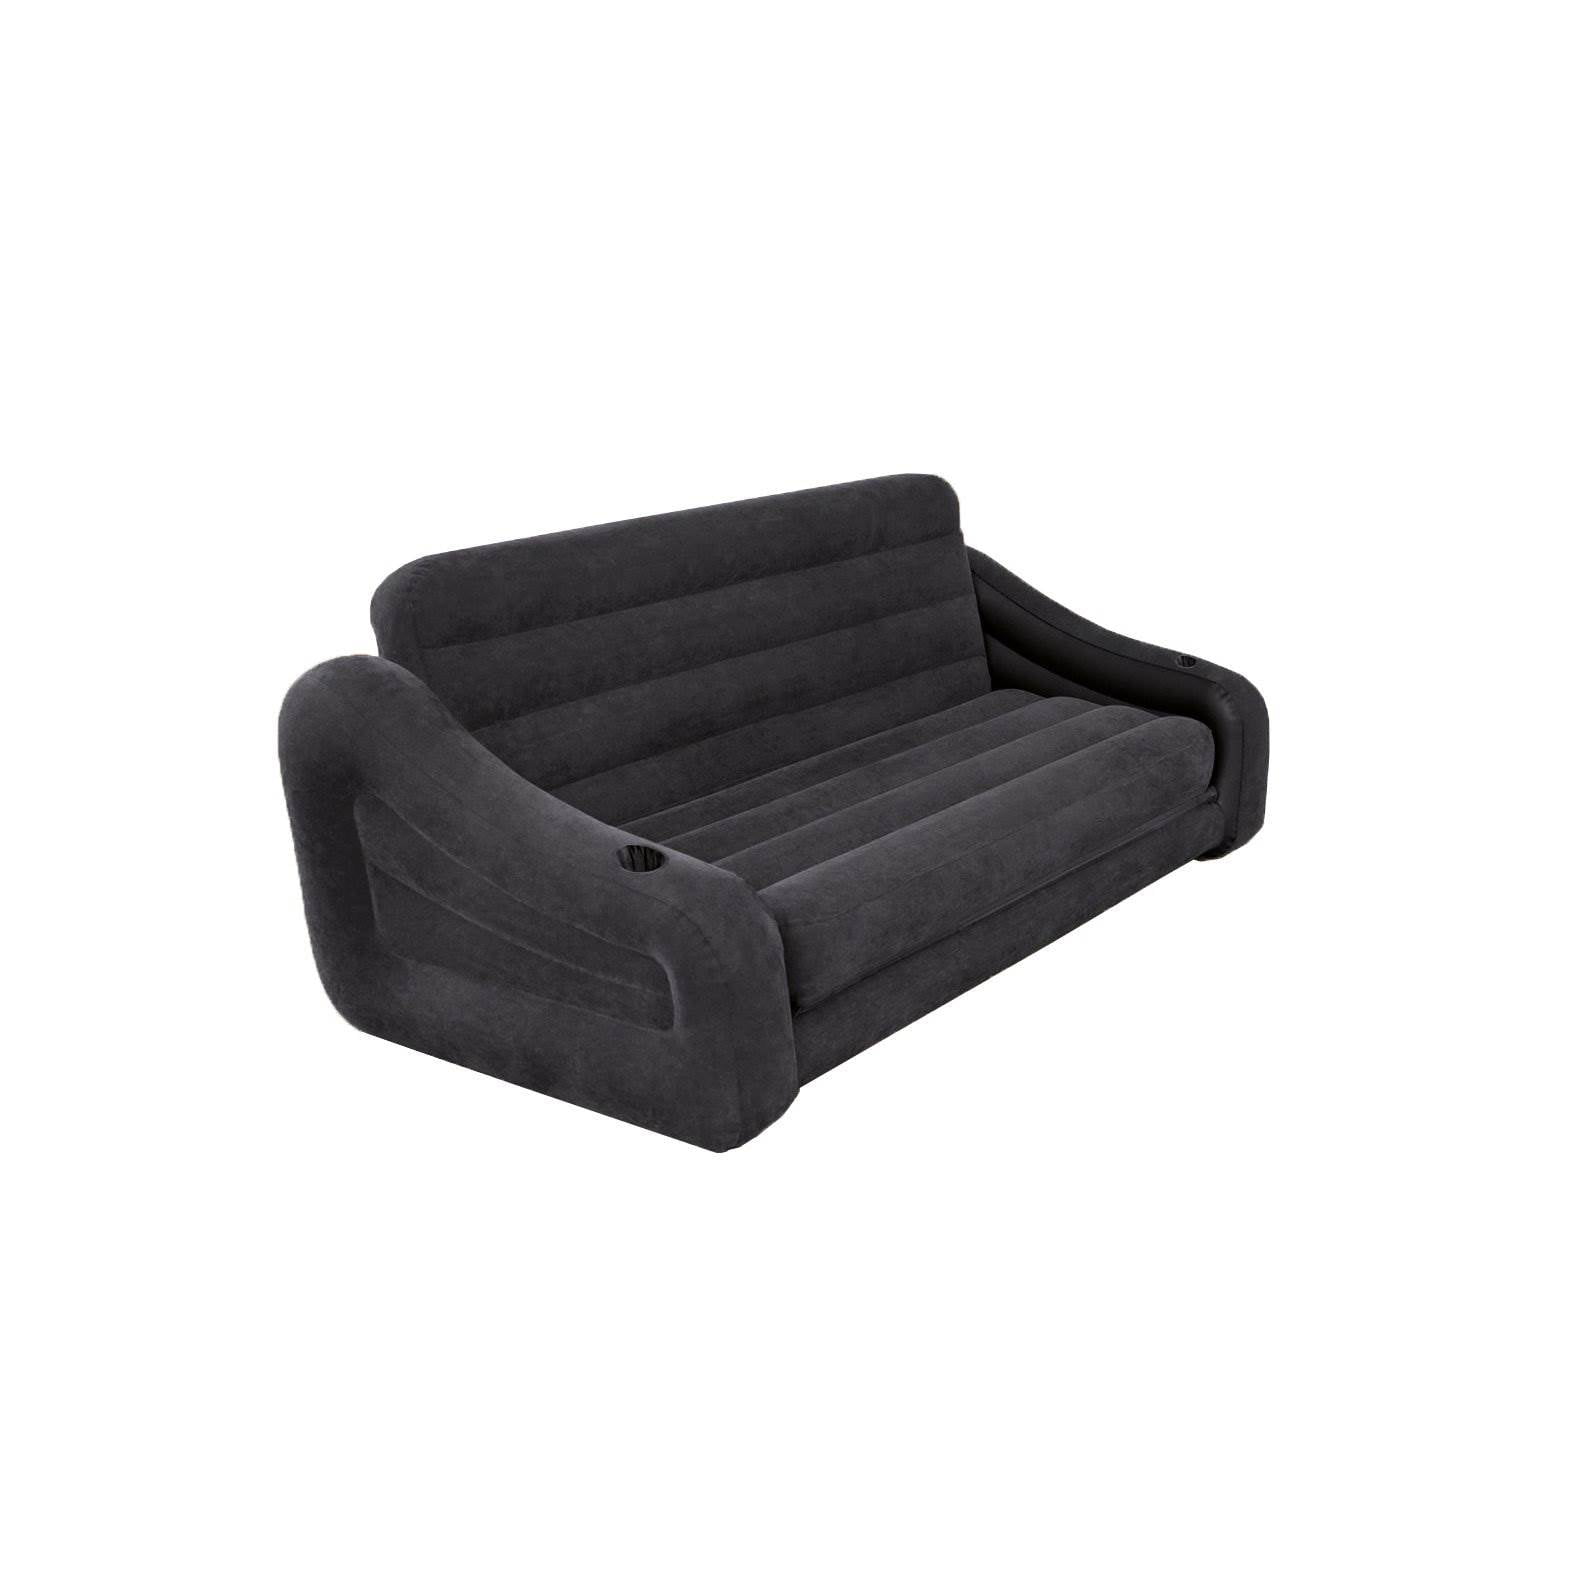 1 Each Intex Queen Inflatable Pull-Out Sofa Bed 